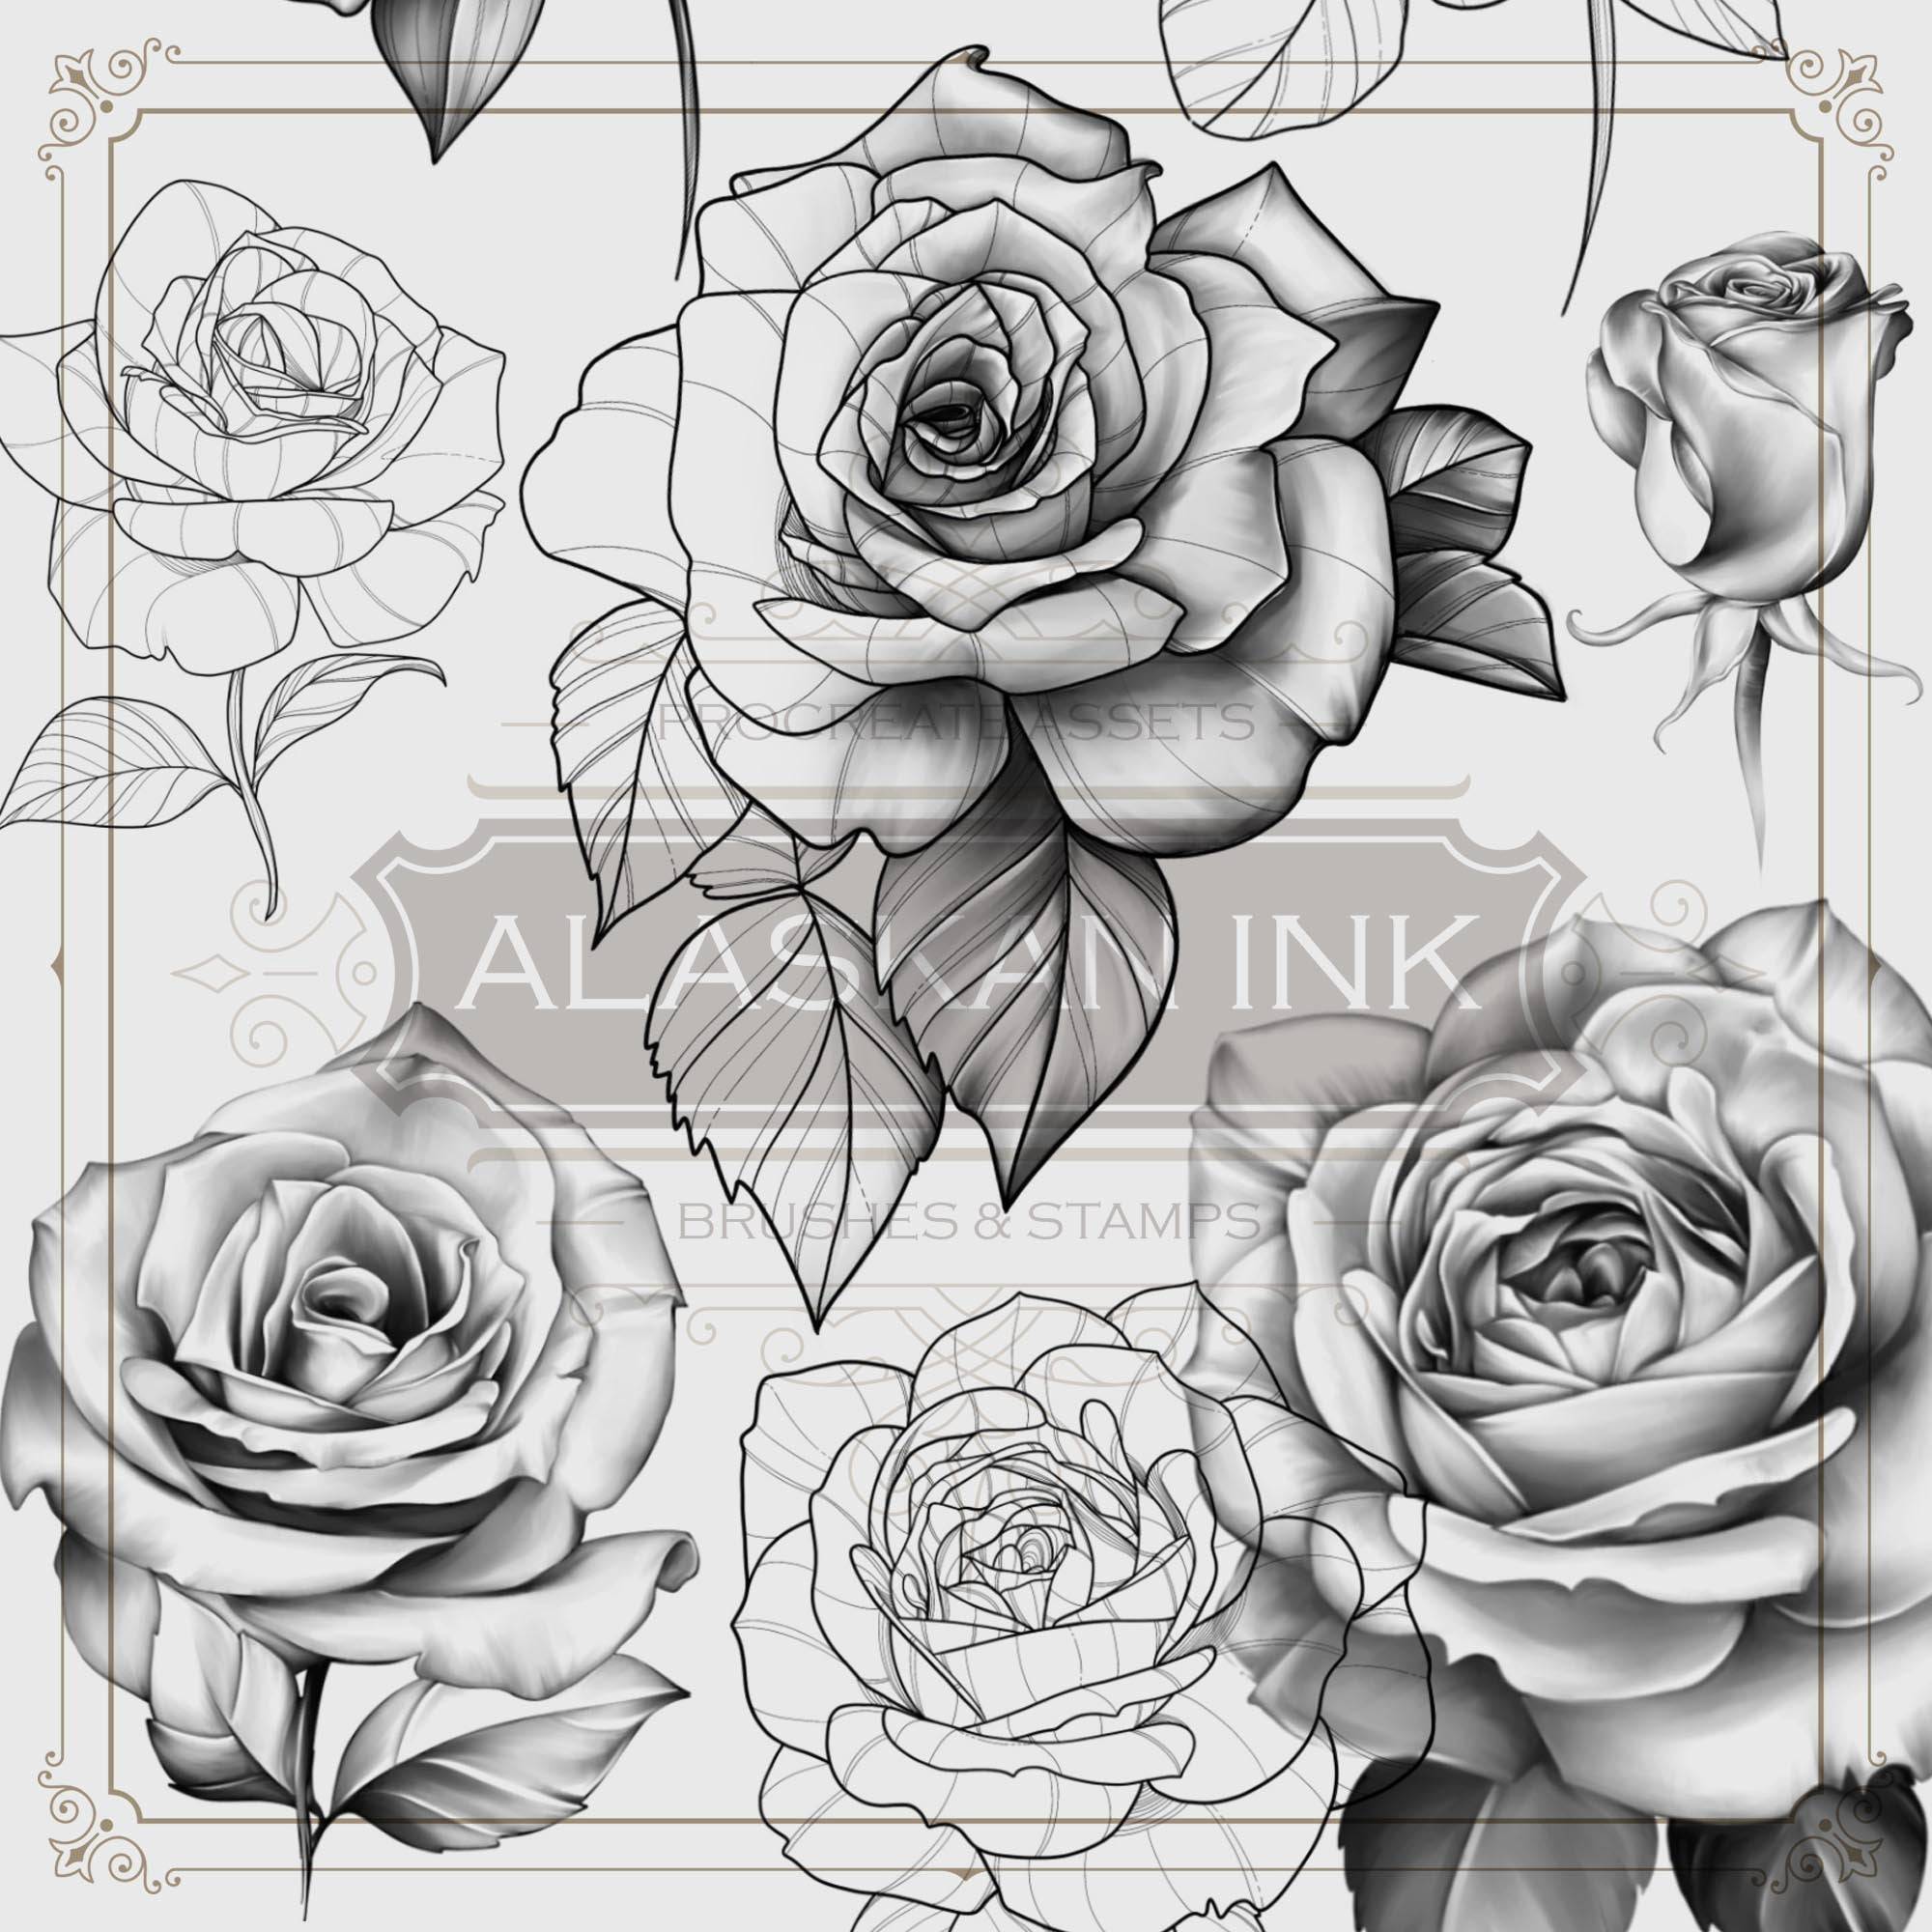 Common small rose tattoo stencil that has deep meaning | Rose tattoo stencil,  Rose drawing tattoo, Flower tattoo drawings